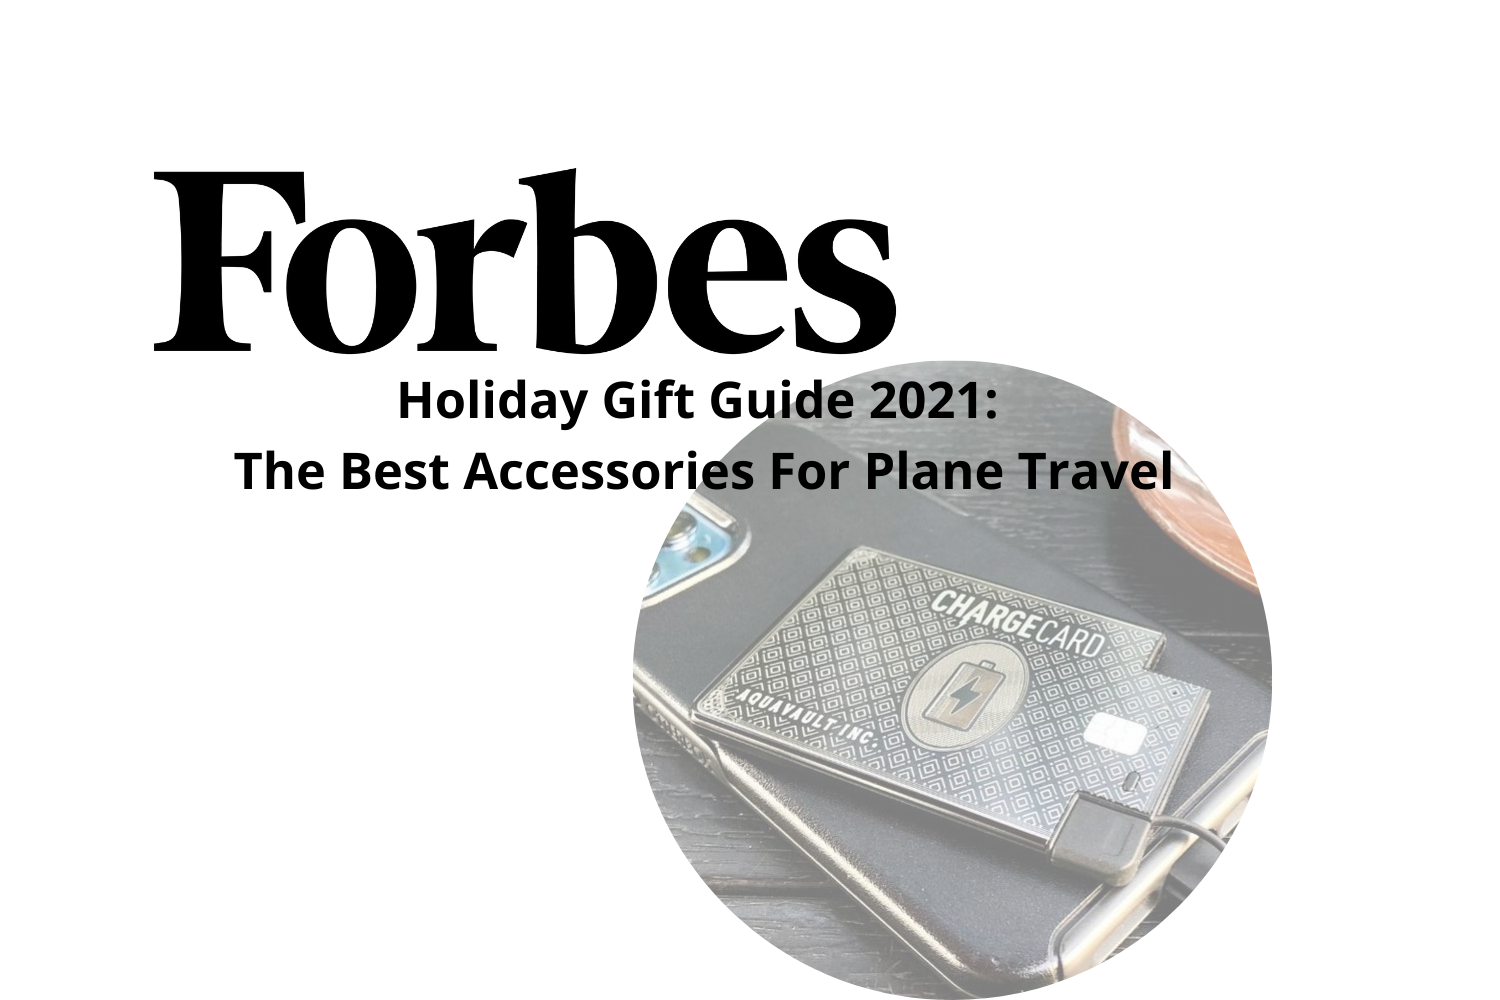 Forbes Holiday Gift Guide 2021: The Best Accessories For Plane Travel